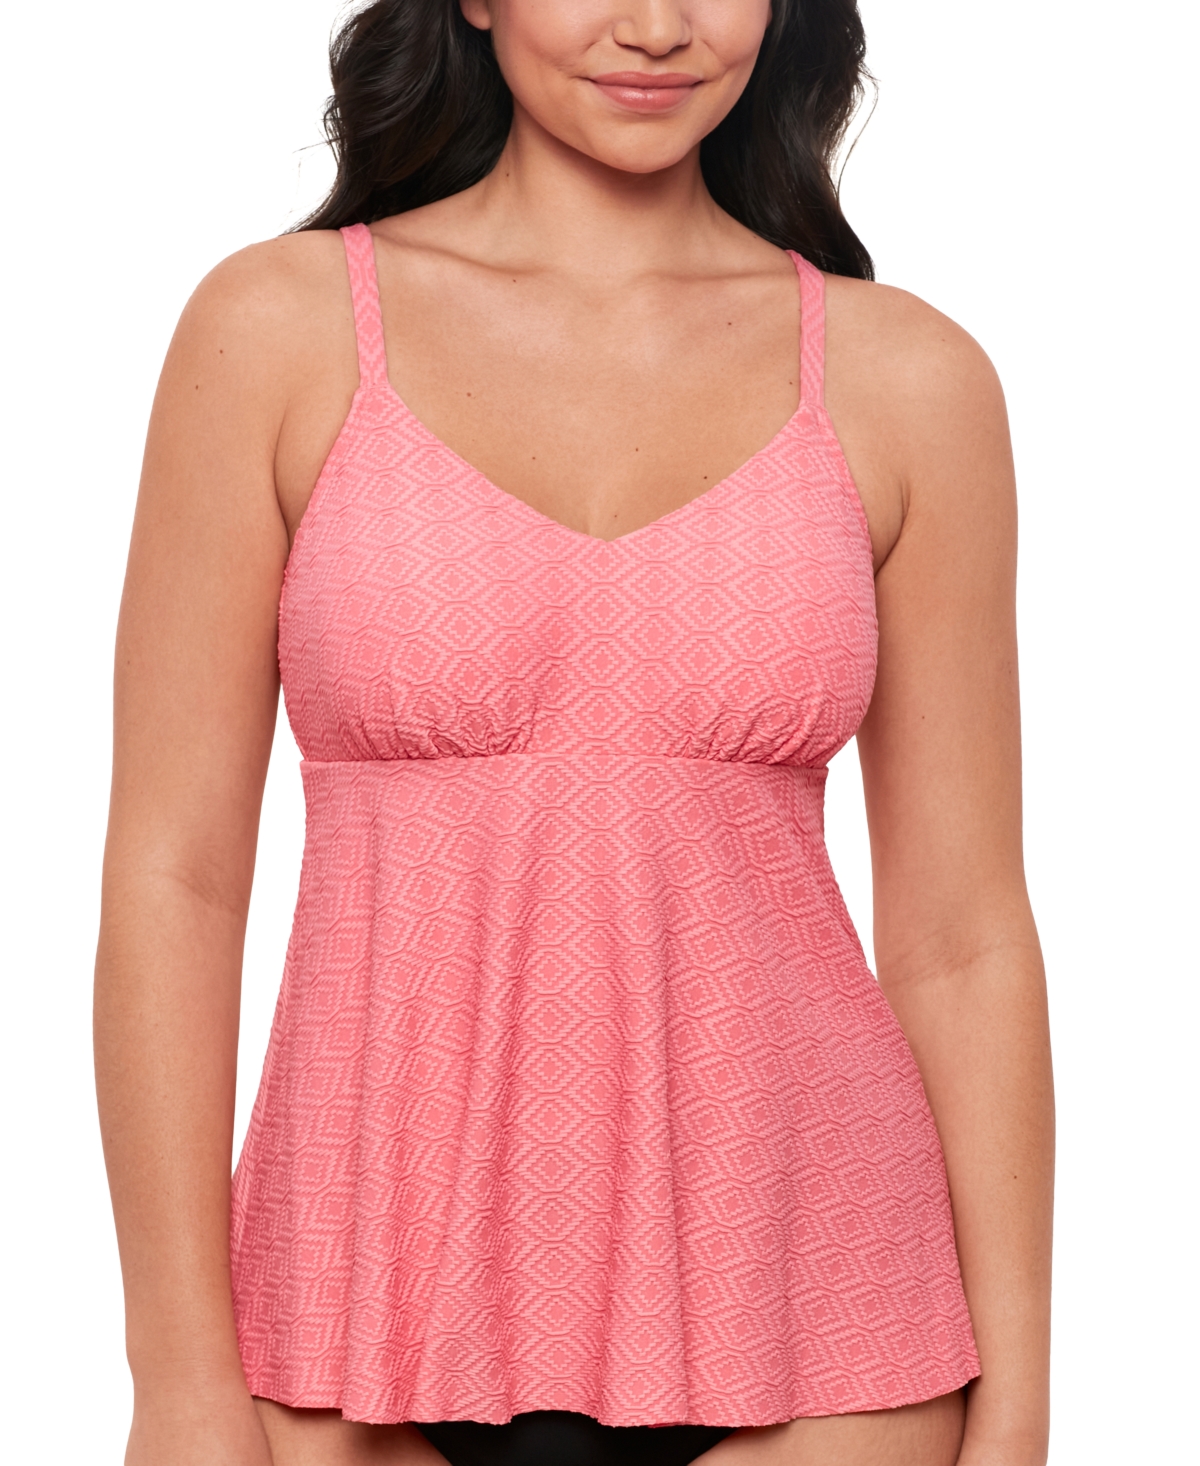 Women's Textured Underwire Tankini Top, Created for Macy's - Guava